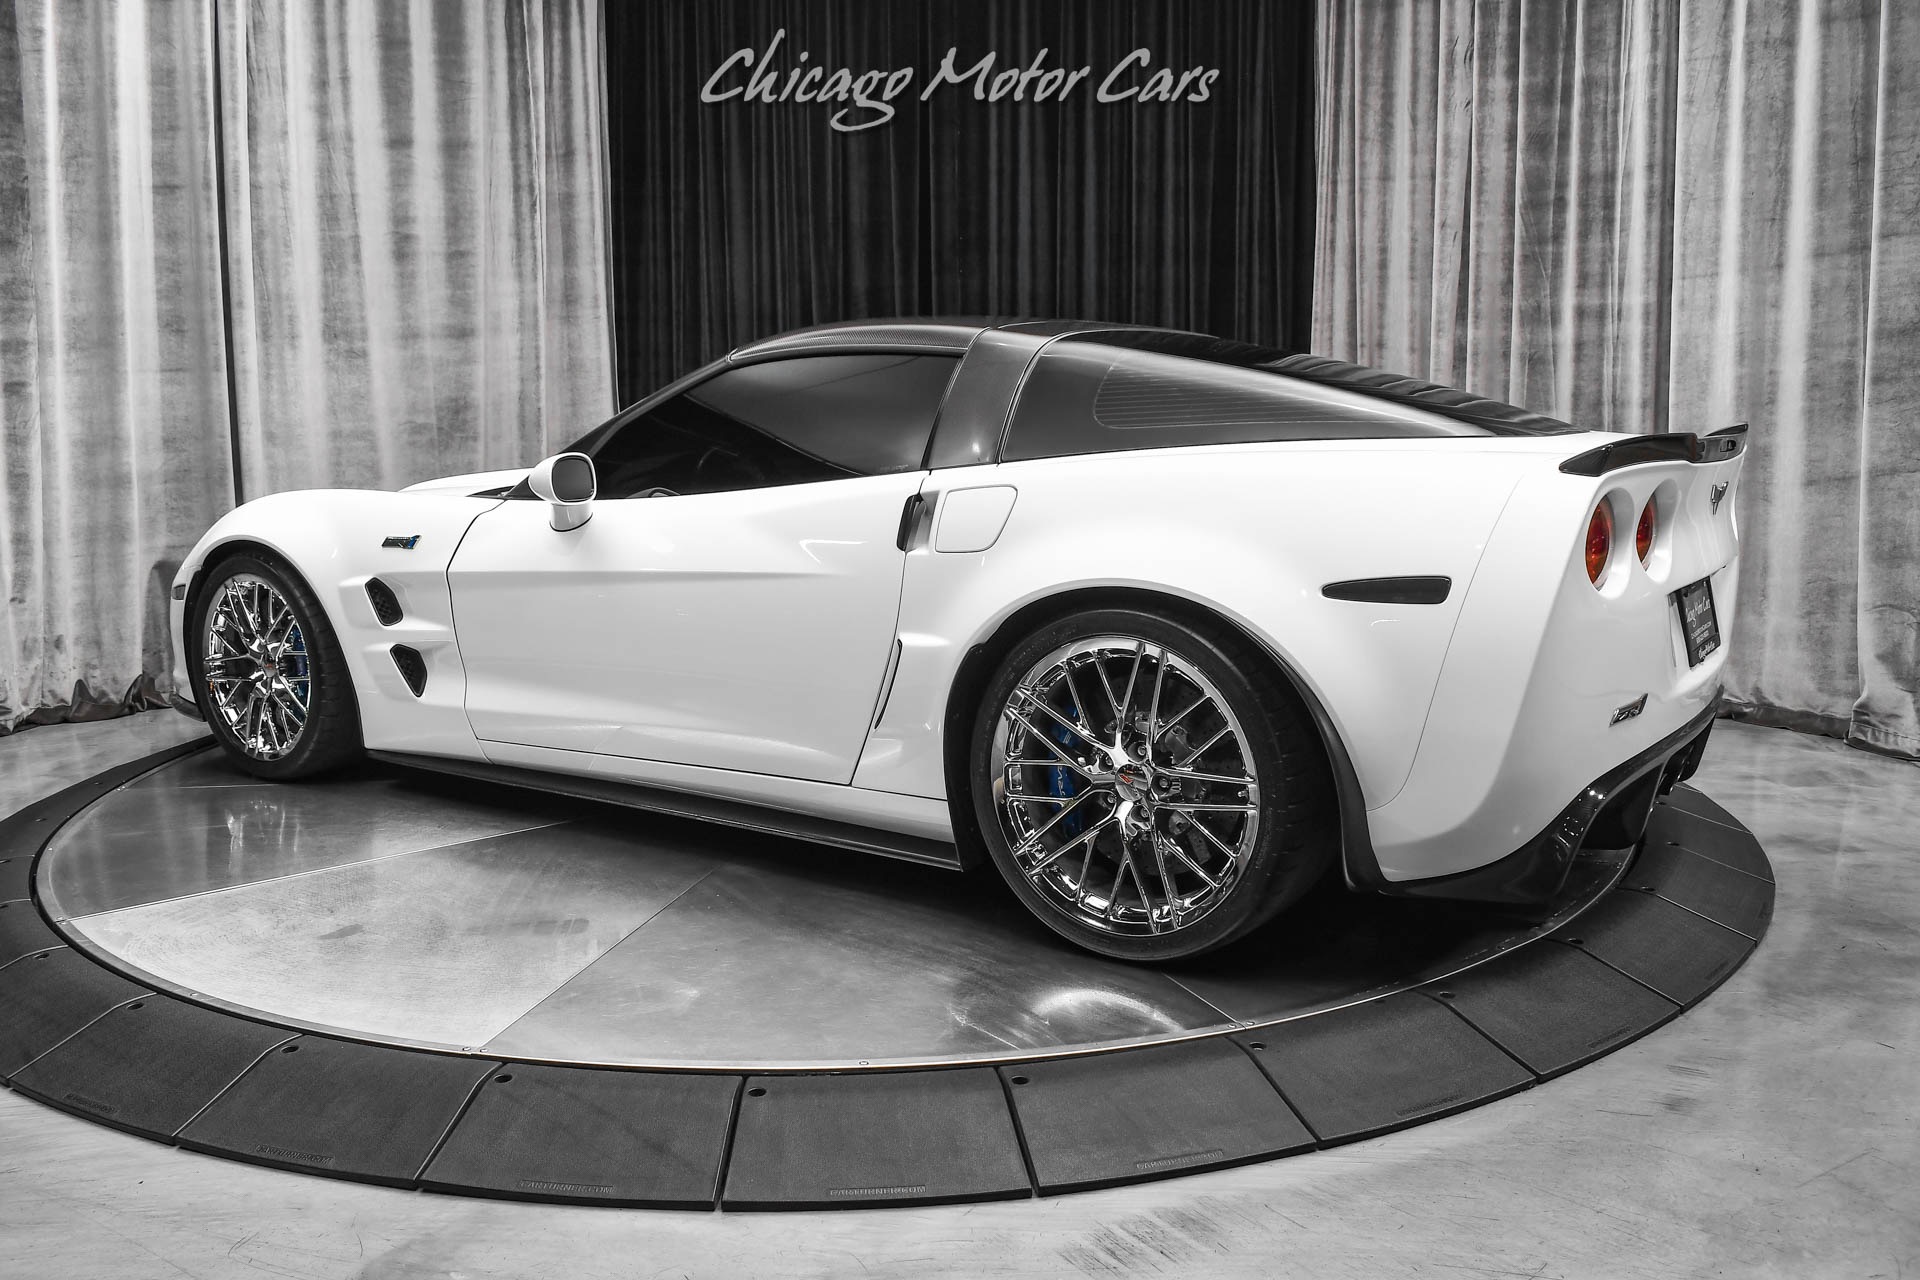 Used-2011-Chevrolet-Corvette-ZR1-3ZR-Coupe-Arctic-White-ONLY-15k-Miles-TASTEFUL-Upgrades-755-WHP